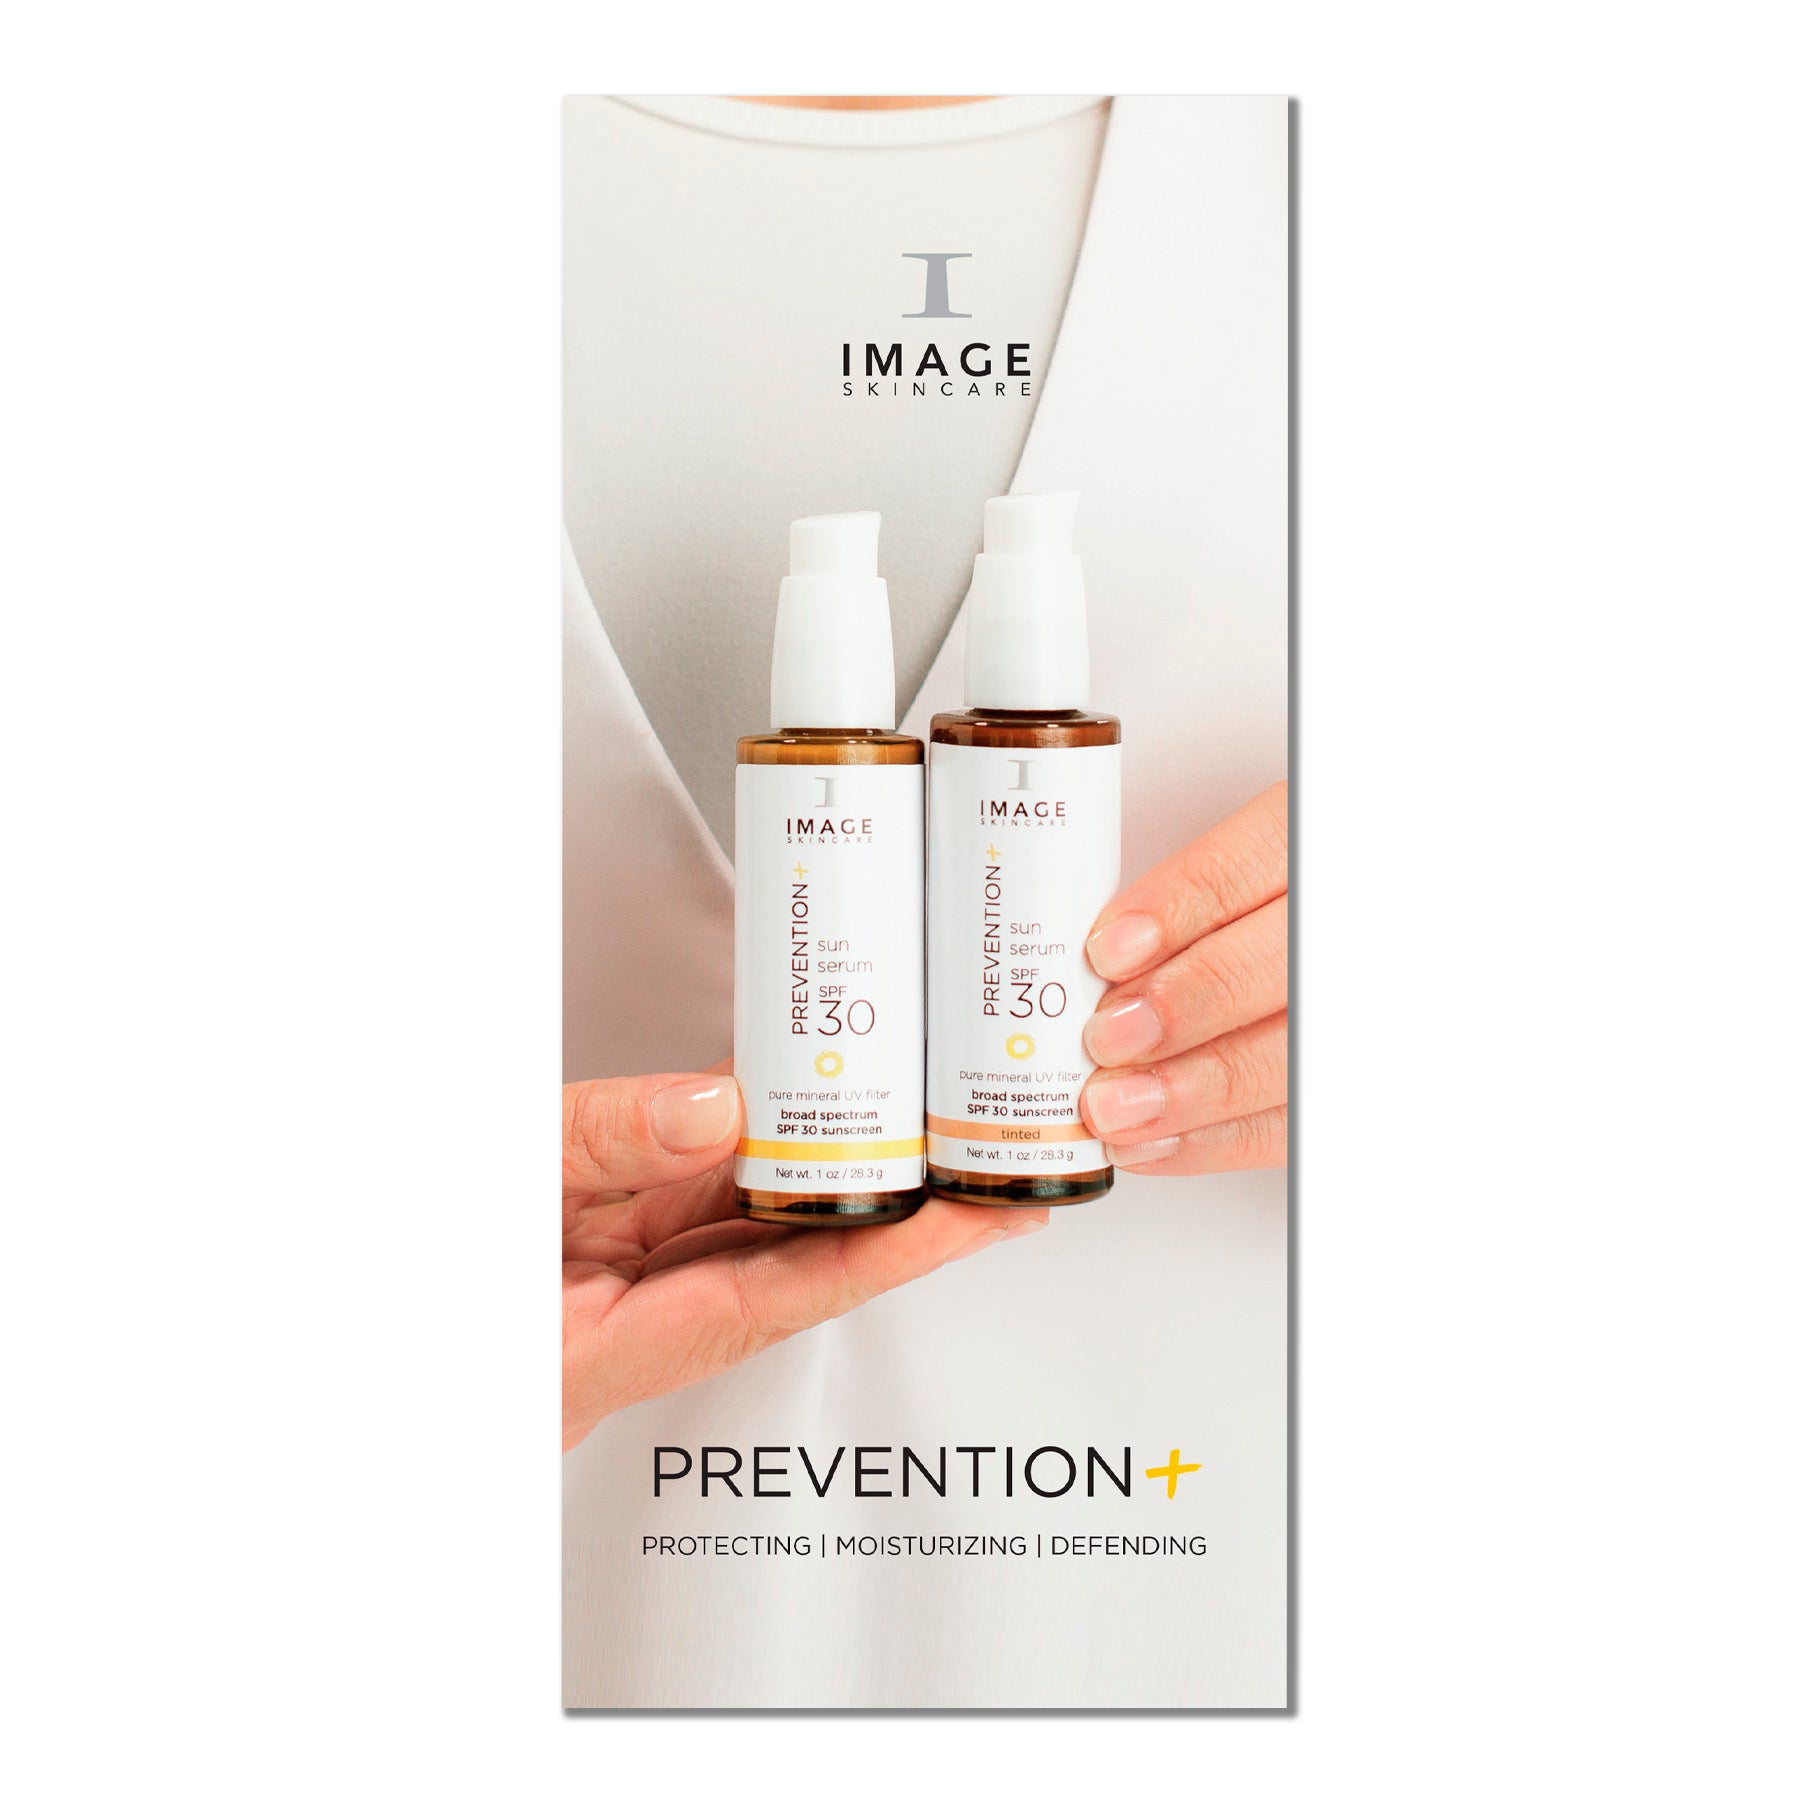 PREVENTION+® trifold